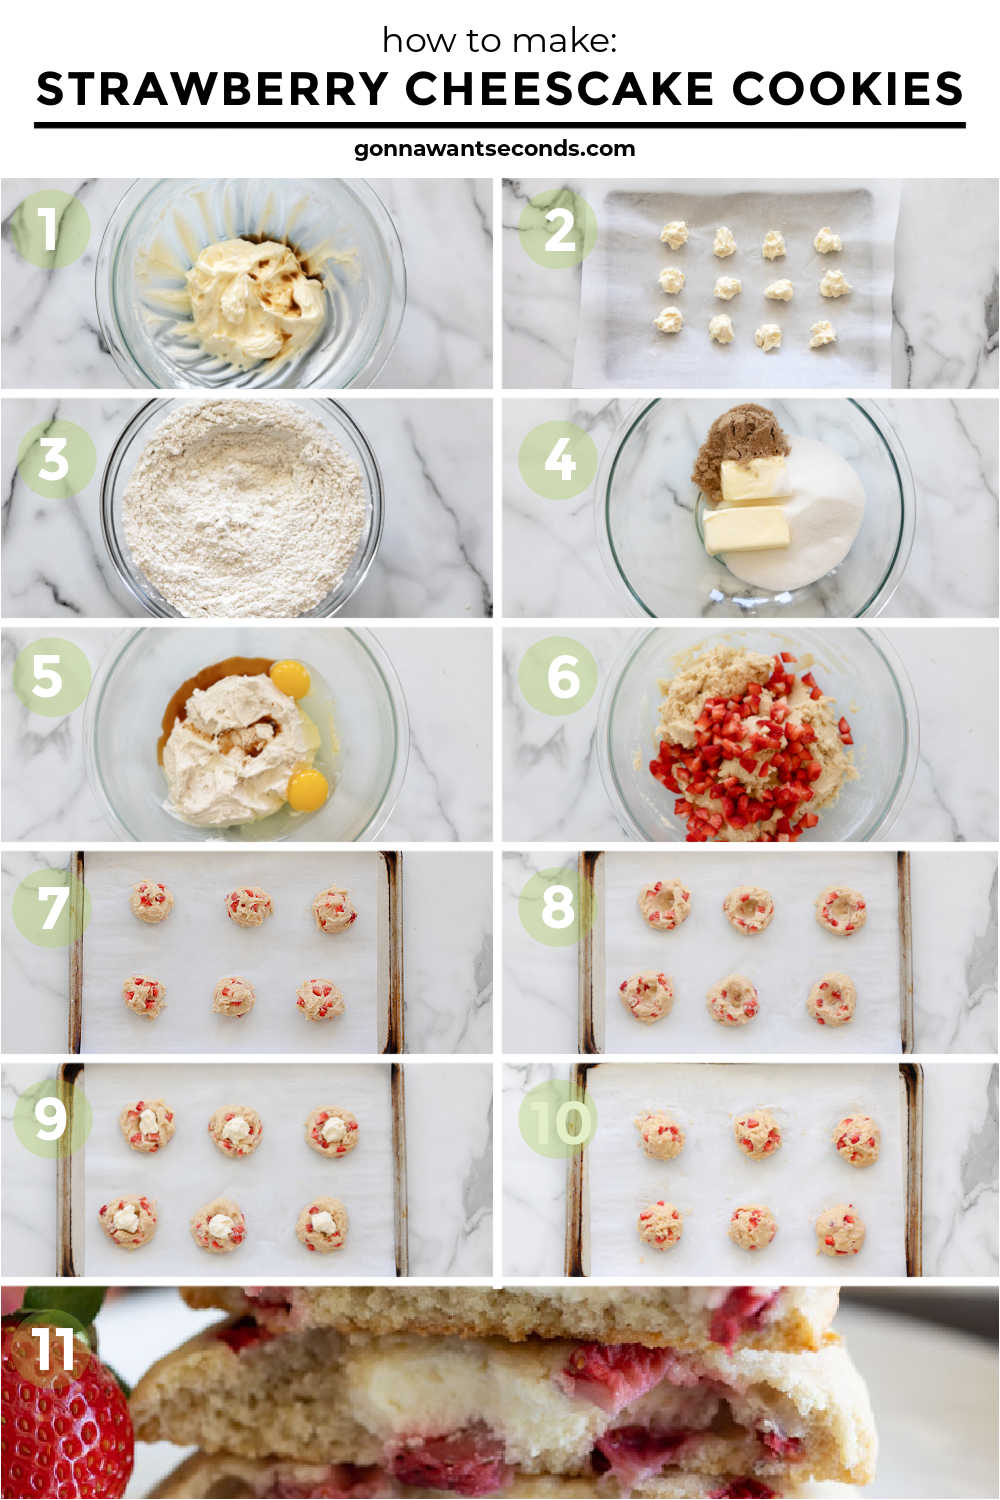 step by step how to make strawberry cheesecake cookies